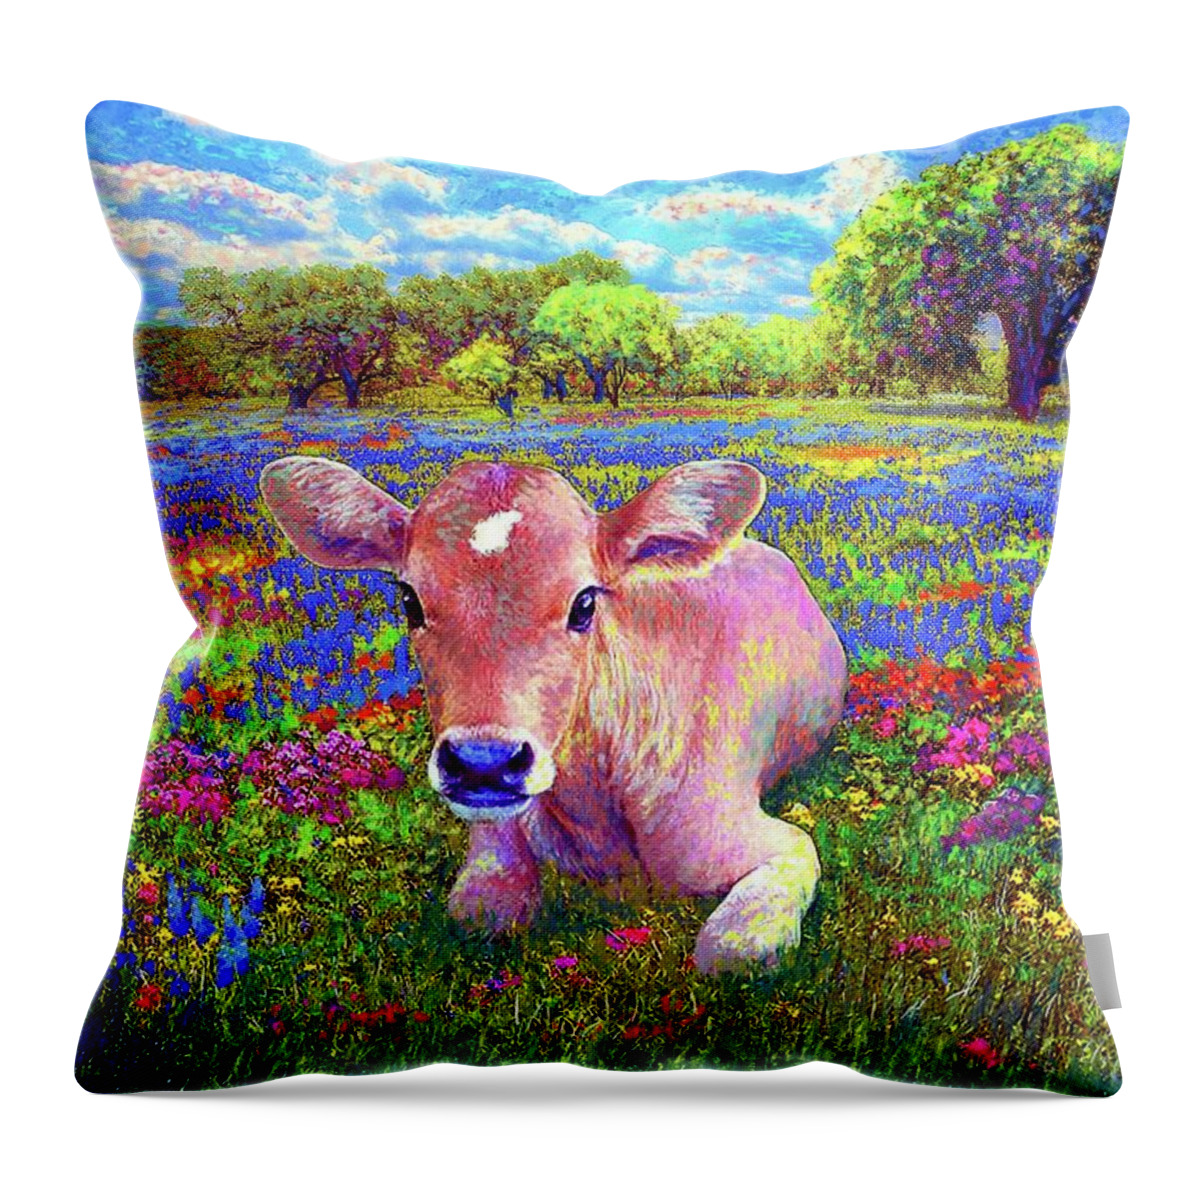 Floral Throw Pillow featuring the painting A Very Content Cow by Jane Small